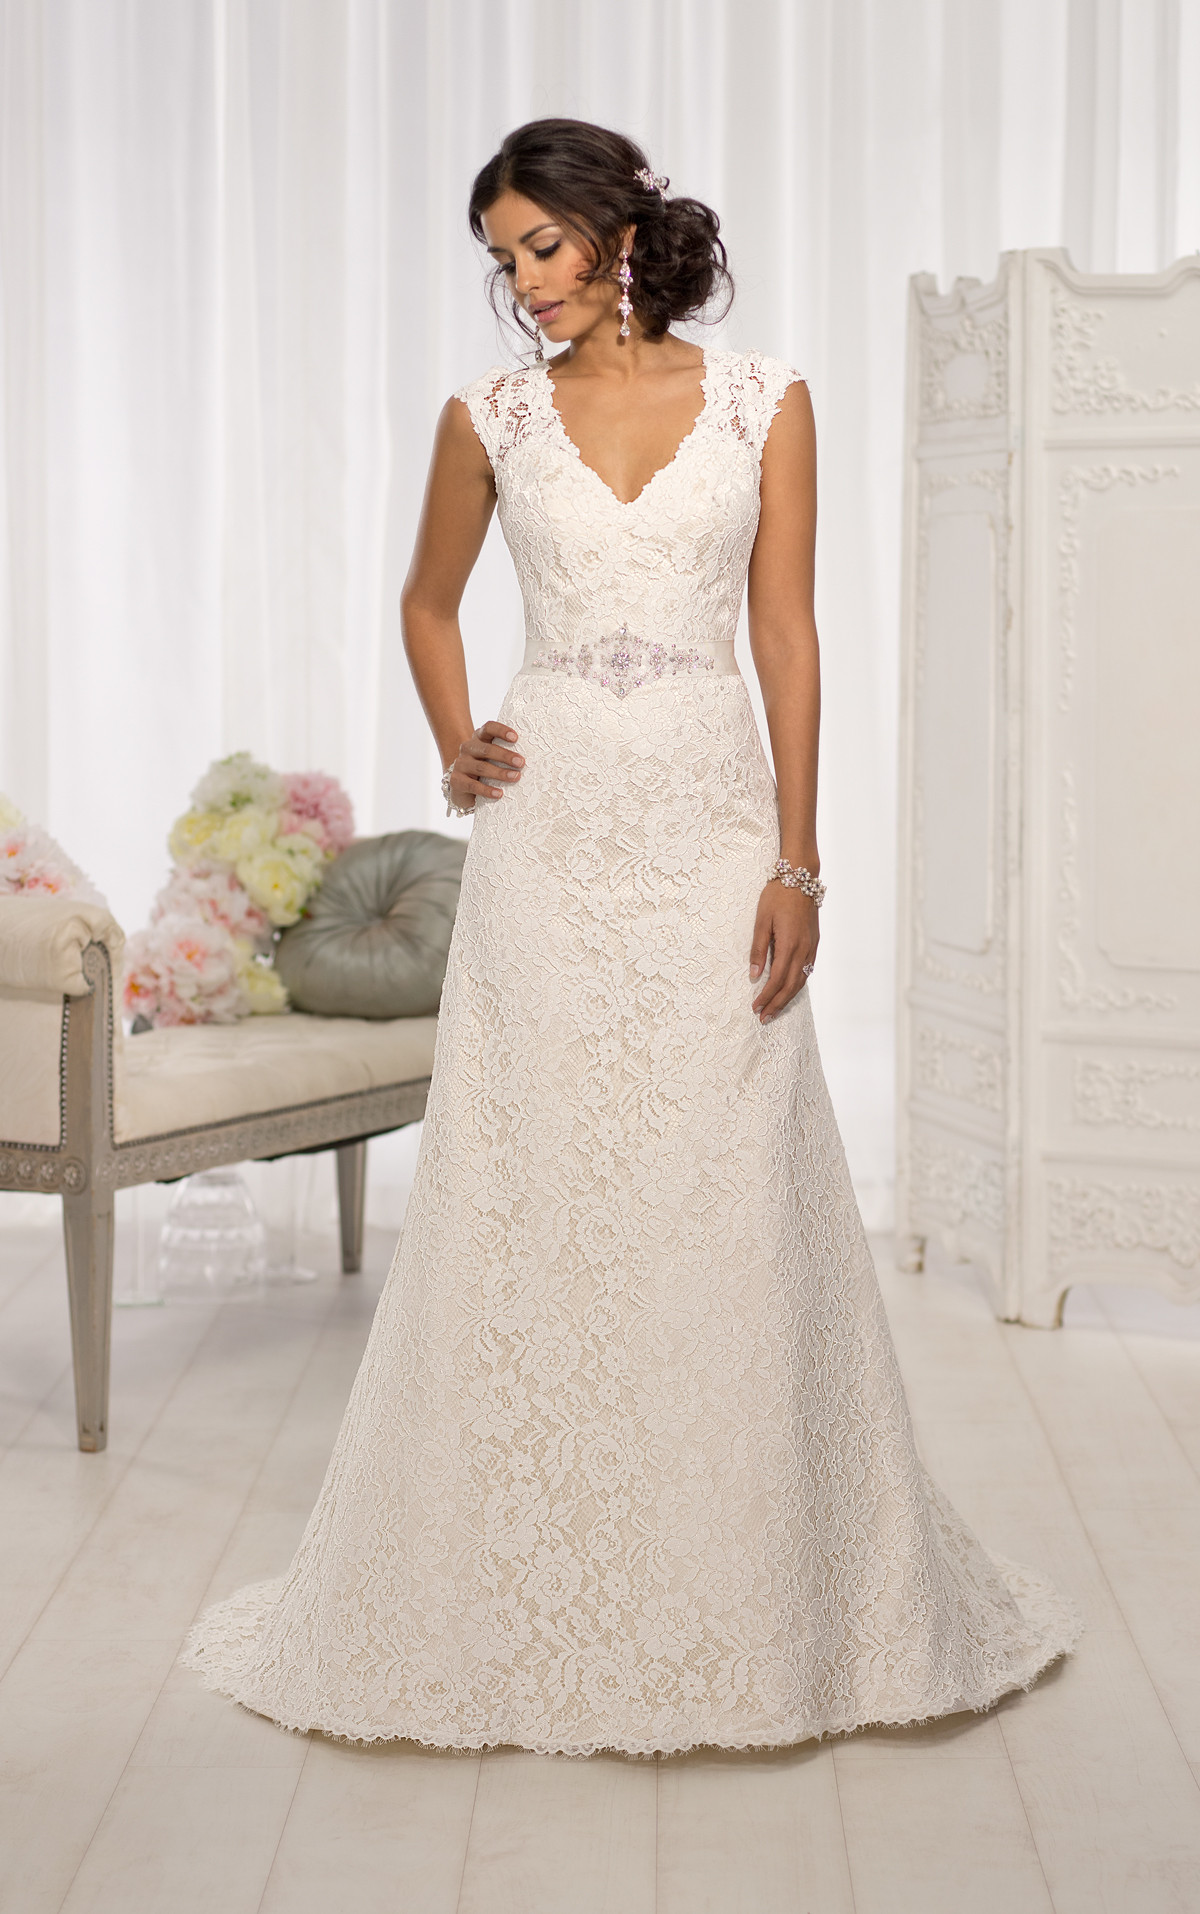 Lace Wedding Dresses With Cap Sleeves
 Wedding Dresses with Sleeves